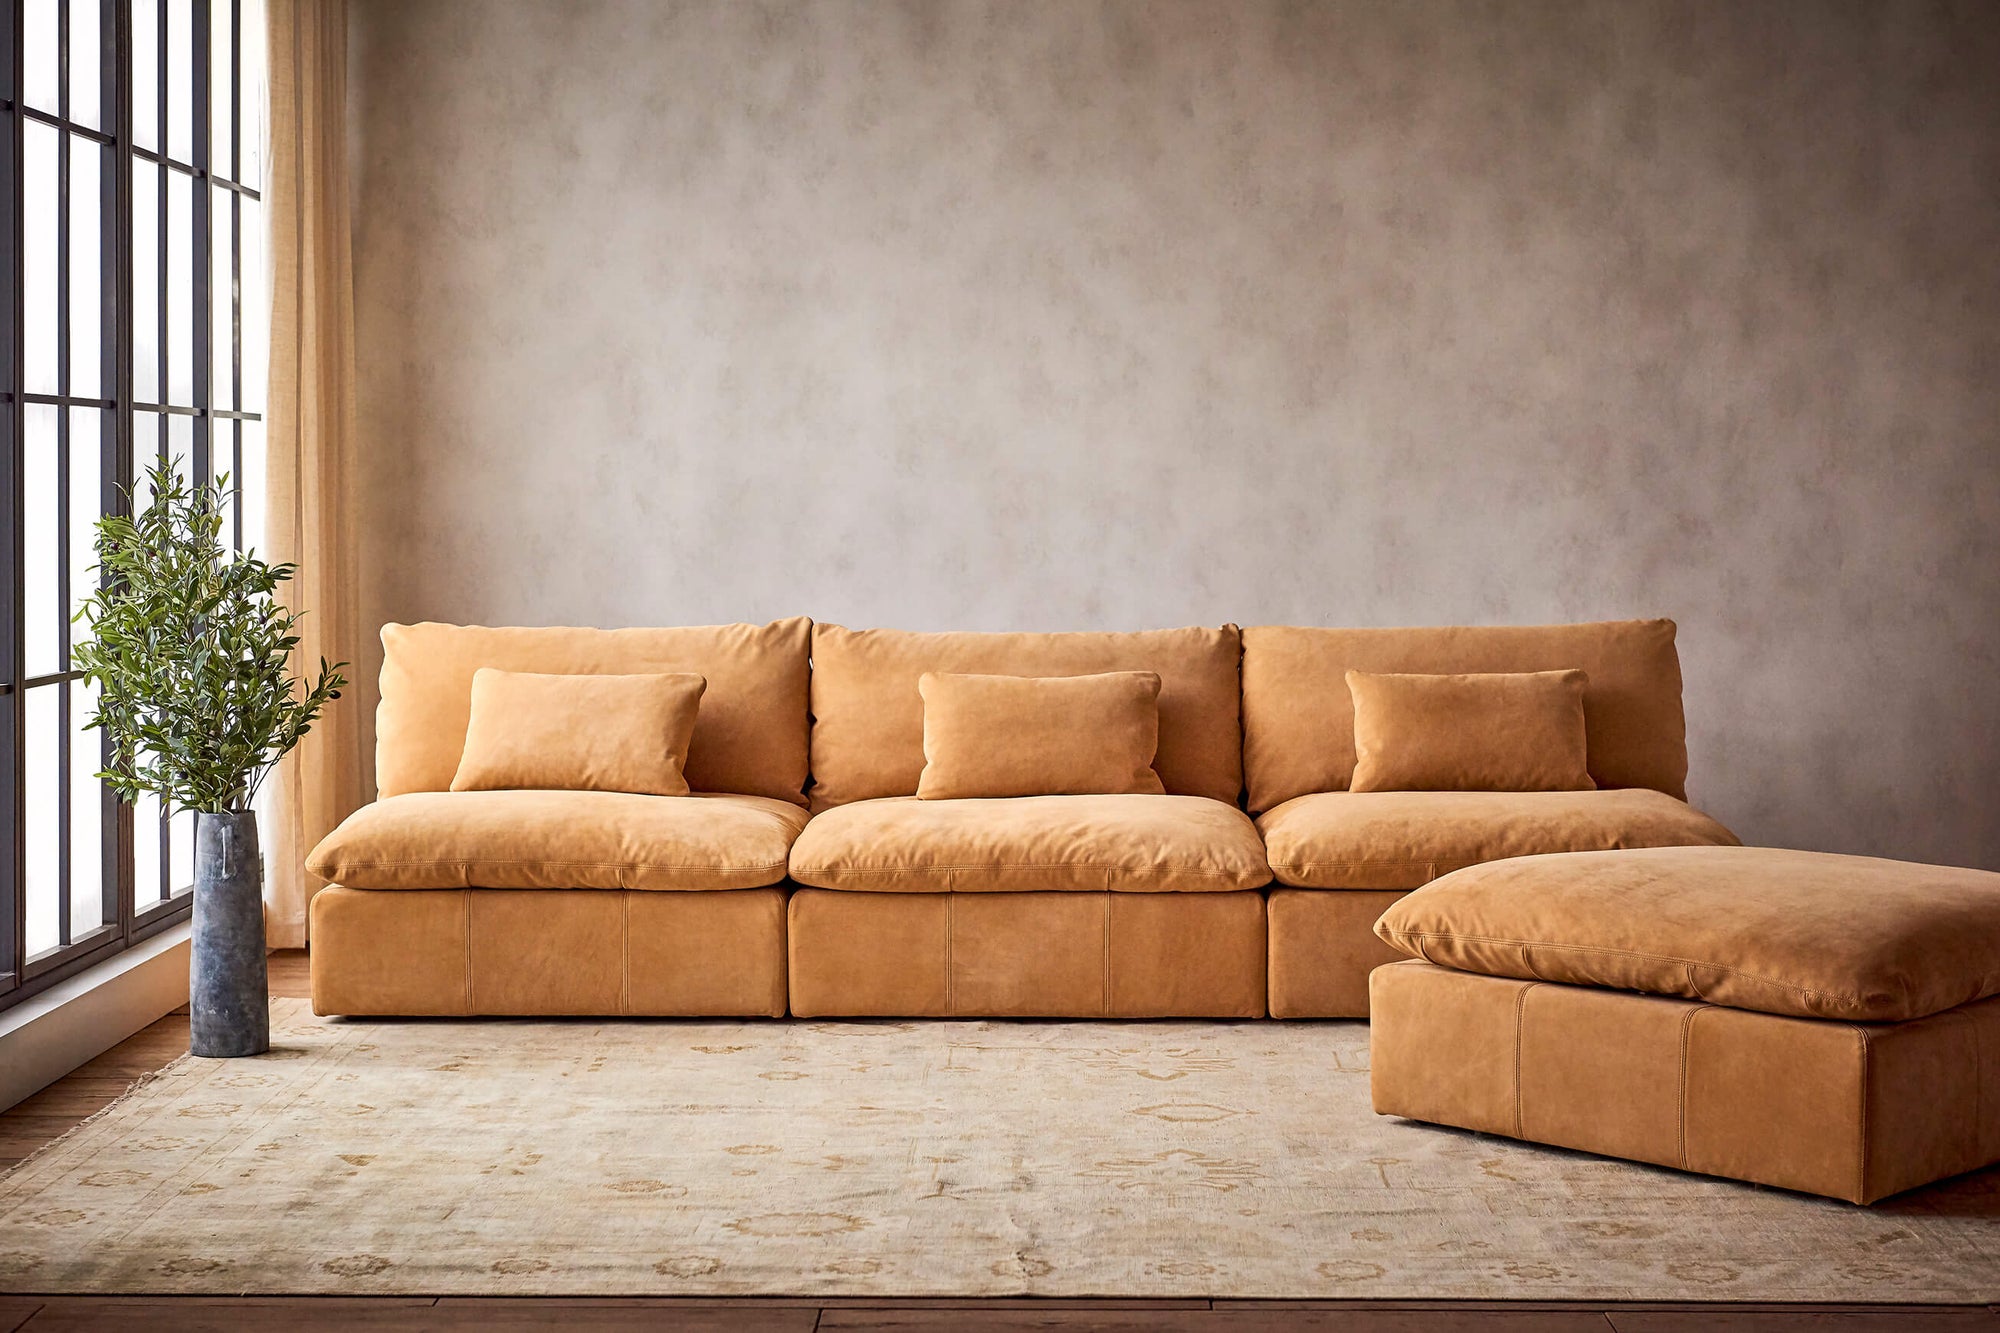 Aria Leather 4-piece Chaise Sectional Sofa in Mojave Glow, a tan Meridian Leather